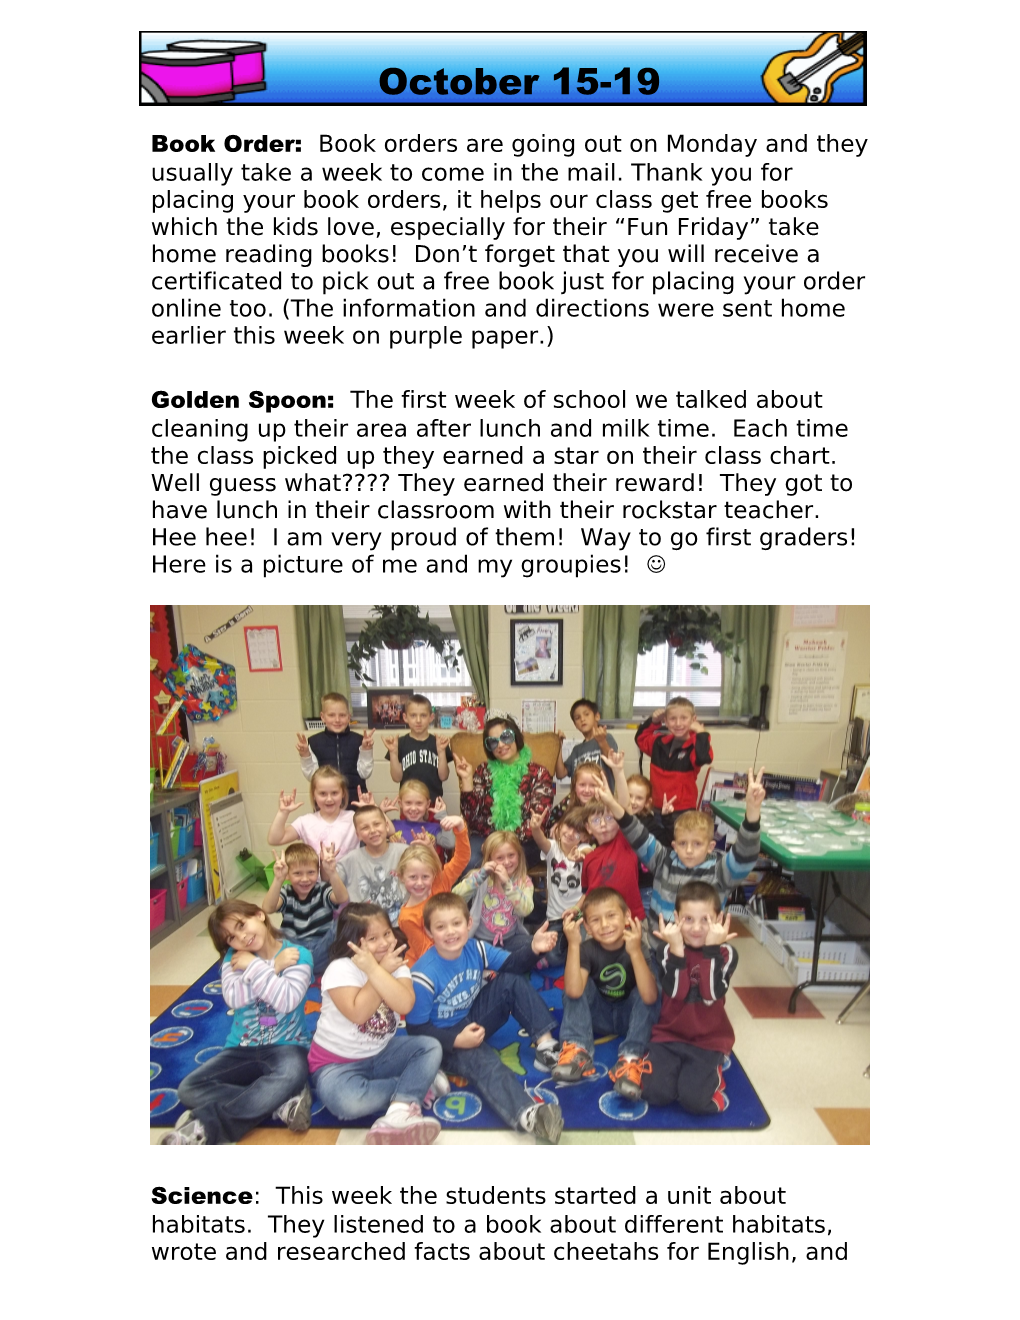 Golden Spoon: the First Week of School We Talked About Cleaning up Their Area After Lunch